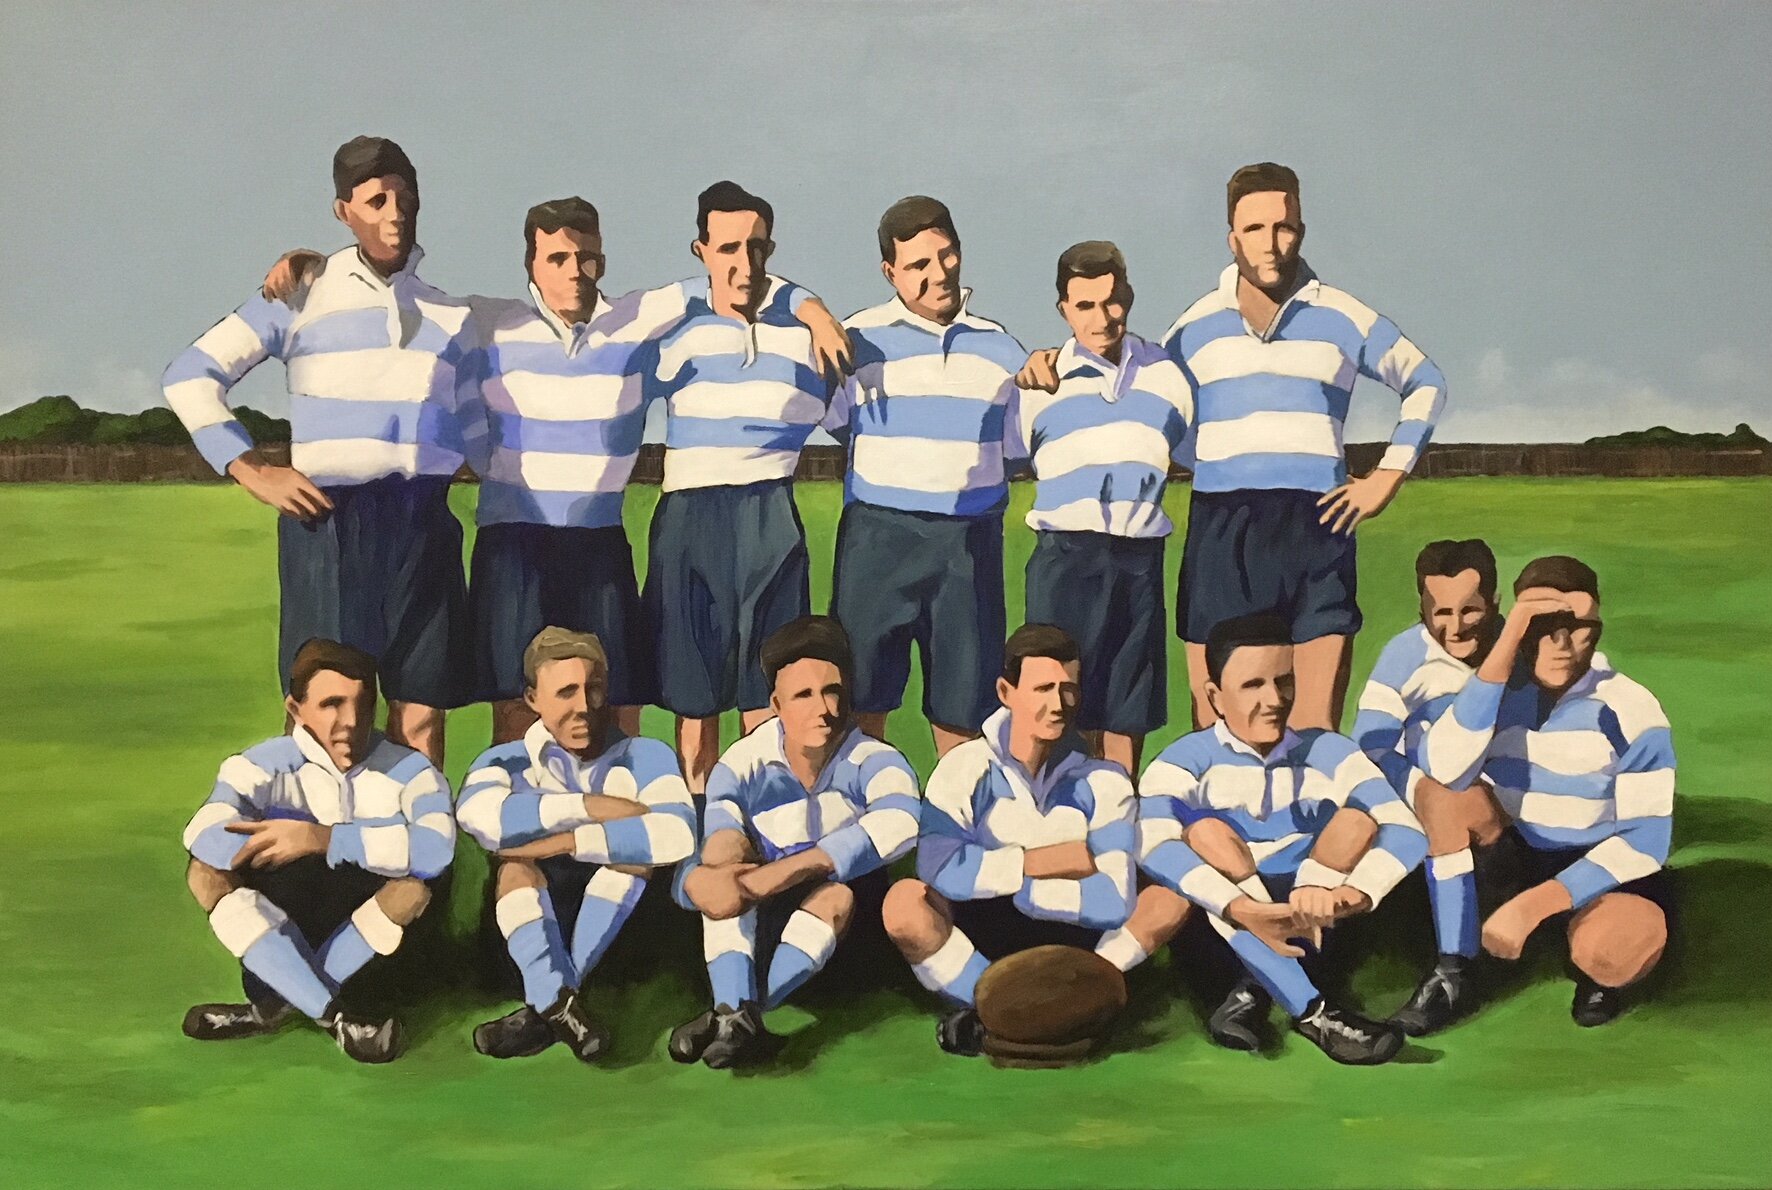   Band of Brothers.  Acrylic on canvas, 61 x 91cm. 